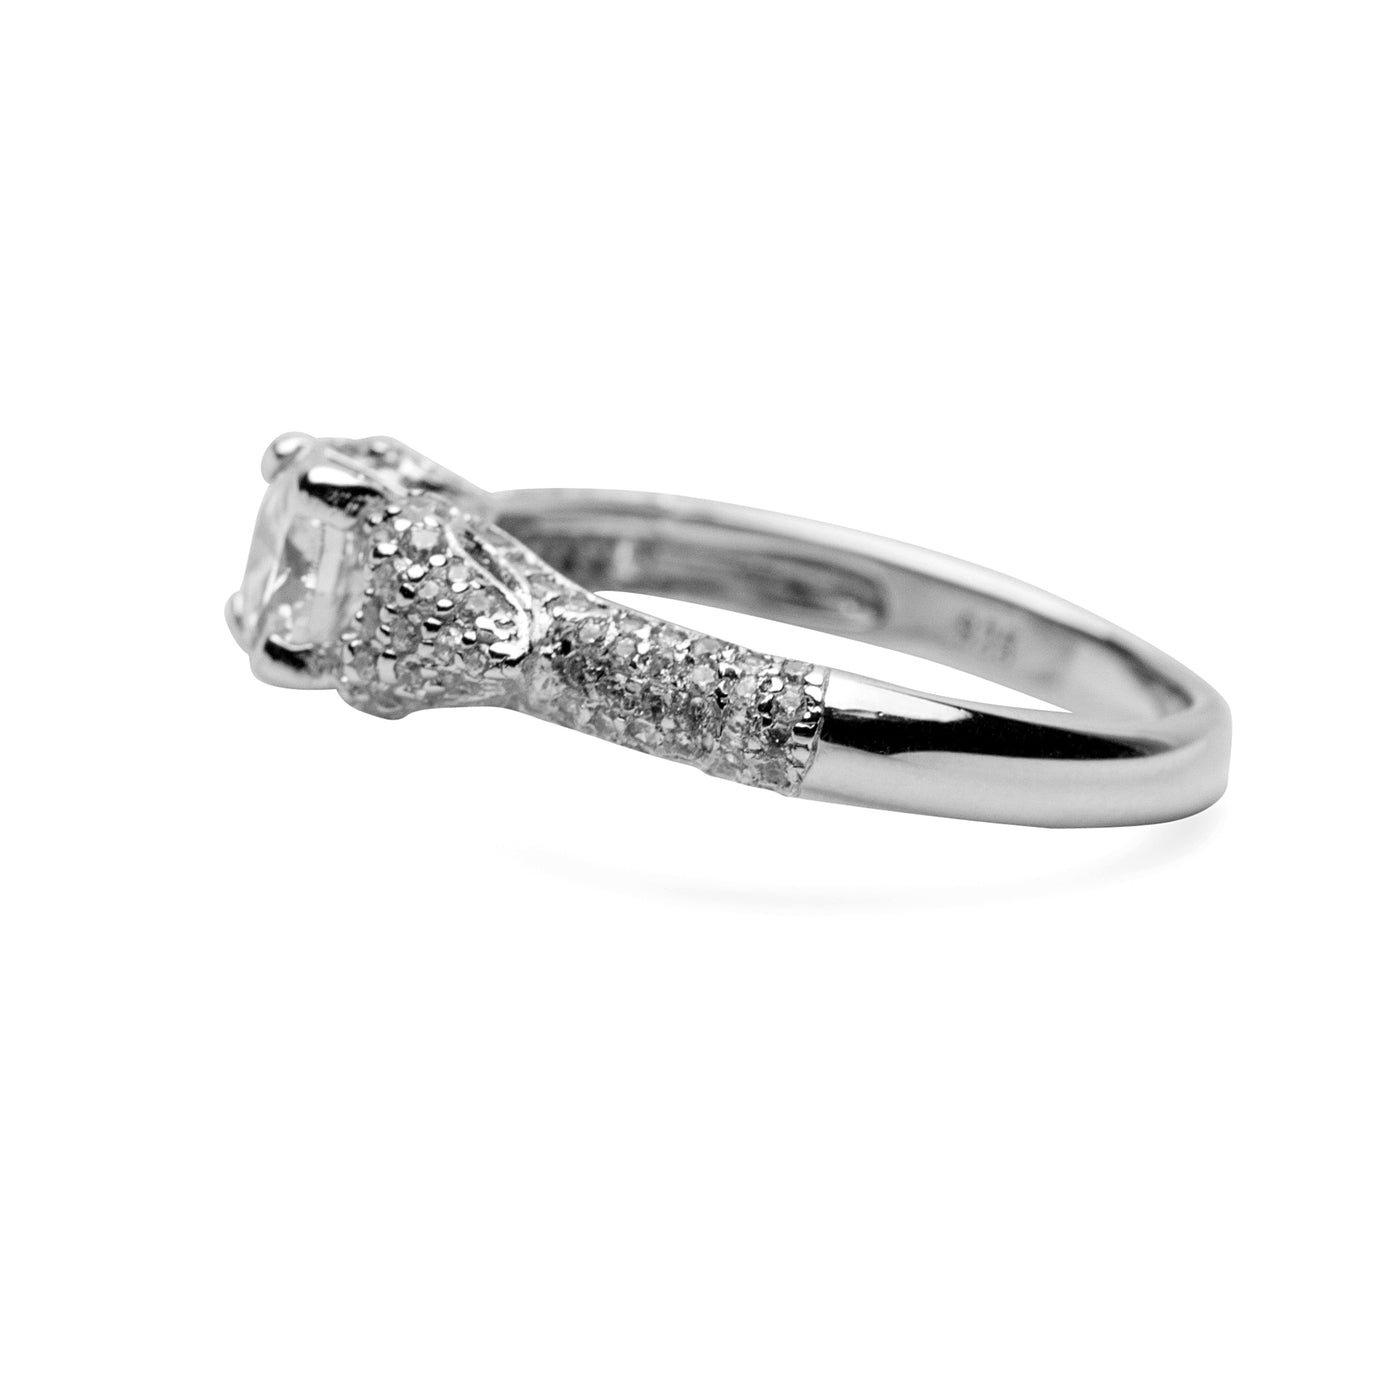 Round Cut Cubic Zirconia Sterling Silver Ring | SilverAndGold